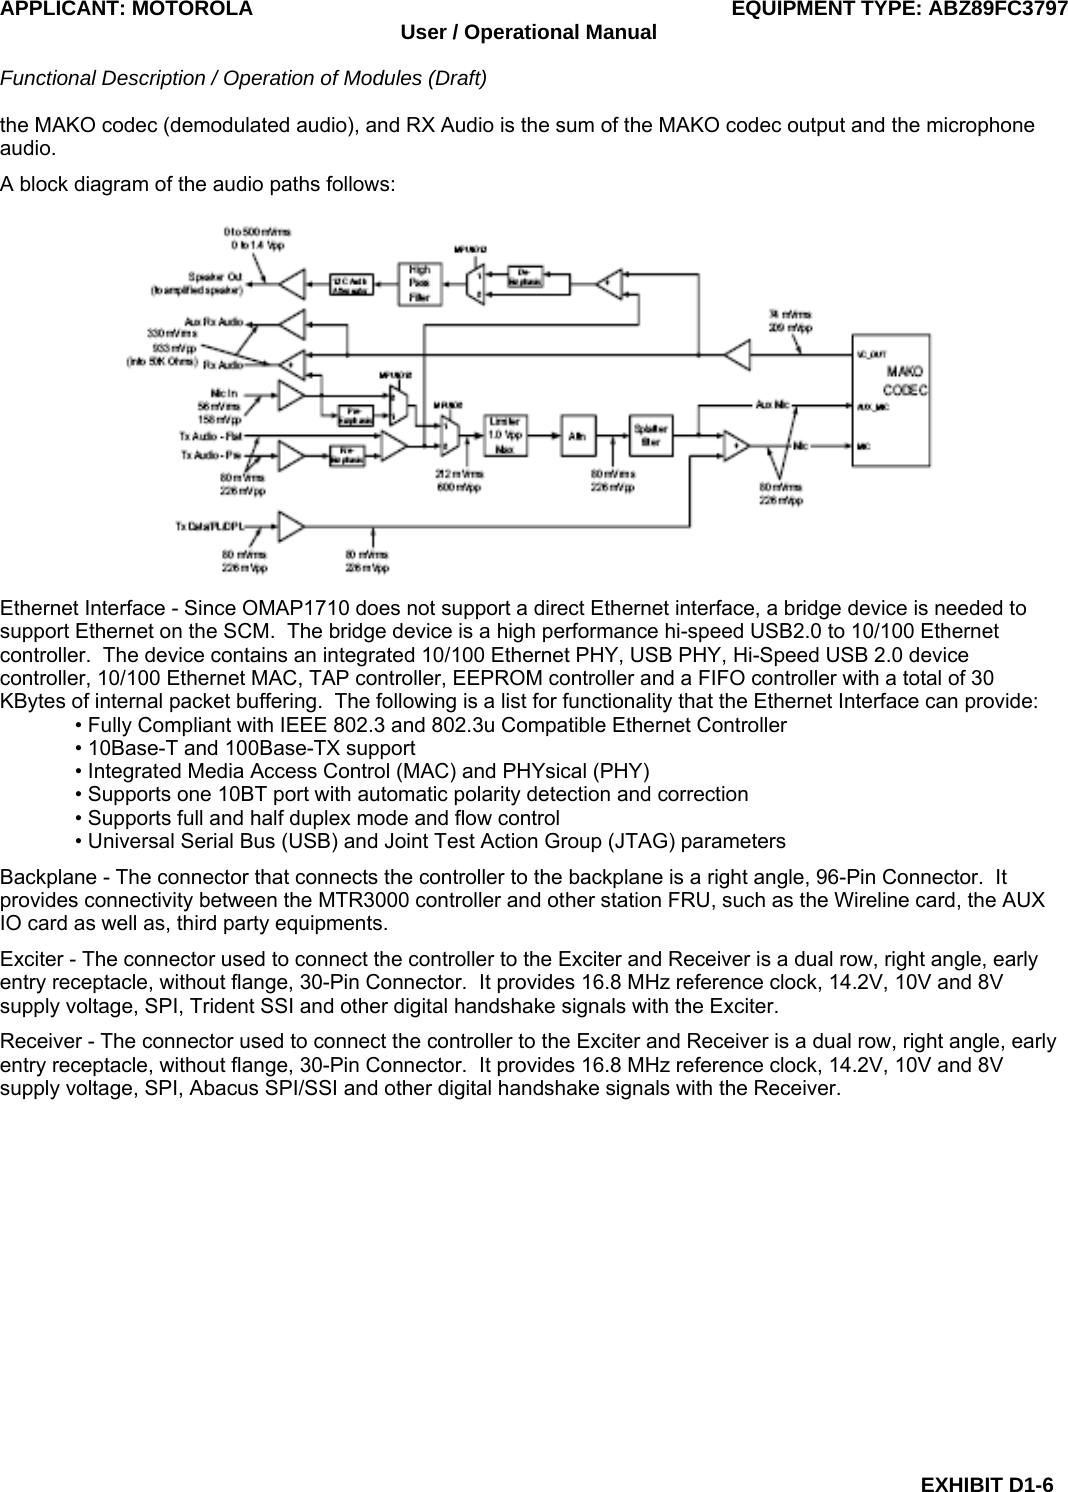 APPLICANT: MOTOROLA  EQUIPMENT TYPE: ABZ89FC3797 User / Operational Manual  Functional Description / Operation of Modules (Draft)  EXHIBIT D1-6 the MAKO codec (demodulated audio), and RX Audio is the sum of the MAKO codec output and the microphone audio. A block diagram of the audio paths follows:  Ethernet Interface - Since OMAP1710 does not support a direct Ethernet interface, a bridge device is needed to support Ethernet on the SCM.  The bridge device is a high performance hi-speed USB2.0 to 10/100 Ethernet controller.  The device contains an integrated 10/100 Ethernet PHY, USB PHY, Hi-Speed USB 2.0 device controller, 10/100 Ethernet MAC, TAP controller, EEPROM controller and a FIFO controller with a total of 30 KBytes of internal packet buffering.  The following is a list for functionality that the Ethernet Interface can provide: • Fully Compliant with IEEE 802.3 and 802.3u Compatible Ethernet Controller • 10Base-T and 100Base-TX support • Integrated Media Access Control (MAC) and PHYsical (PHY) • Supports one 10BT port with automatic polarity detection and correction • Supports full and half duplex mode and flow control • Universal Serial Bus (USB) and Joint Test Action Group (JTAG) parameters Backplane - The connector that connects the controller to the backplane is a right angle, 96-Pin Connector.  It provides connectivity between the MTR3000 controller and other station FRU, such as the Wireline card, the AUX IO card as well as, third party equipments. Exciter - The connector used to connect the controller to the Exciter and Receiver is a dual row, right angle, early entry receptacle, without flange, 30-Pin Connector.  It provides 16.8 MHz reference clock, 14.2V, 10V and 8V supply voltage, SPI, Trident SSI and other digital handshake signals with the Exciter. Receiver - The connector used to connect the controller to the Exciter and Receiver is a dual row, right angle, early entry receptacle, without flange, 30-Pin Connector.  It provides 16.8 MHz reference clock, 14.2V, 10V and 8V supply voltage, SPI, Abacus SPI/SSI and other digital handshake signals with the Receiver.  